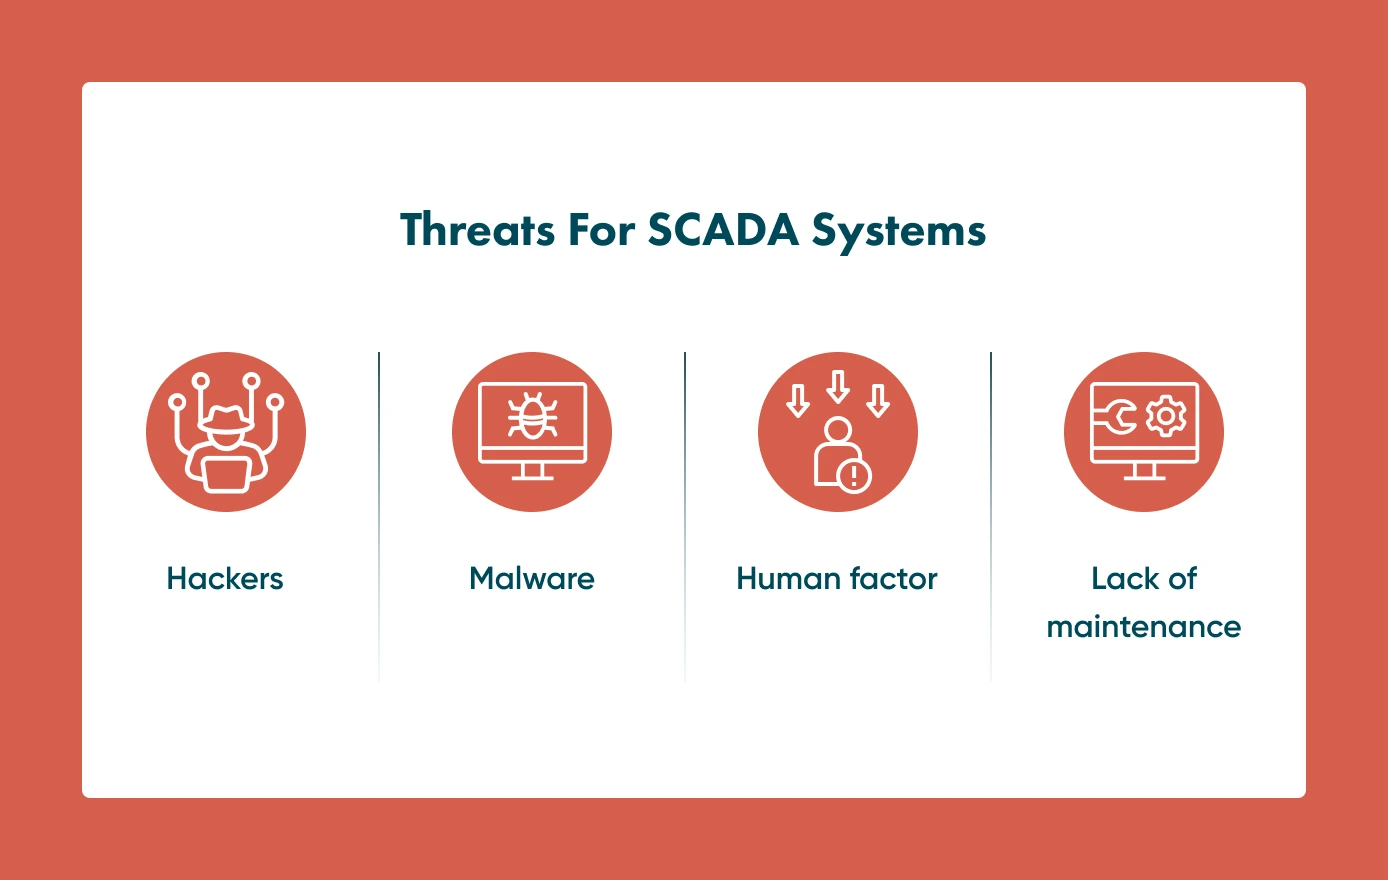 Threats for a SCADA System can come from many angles. 